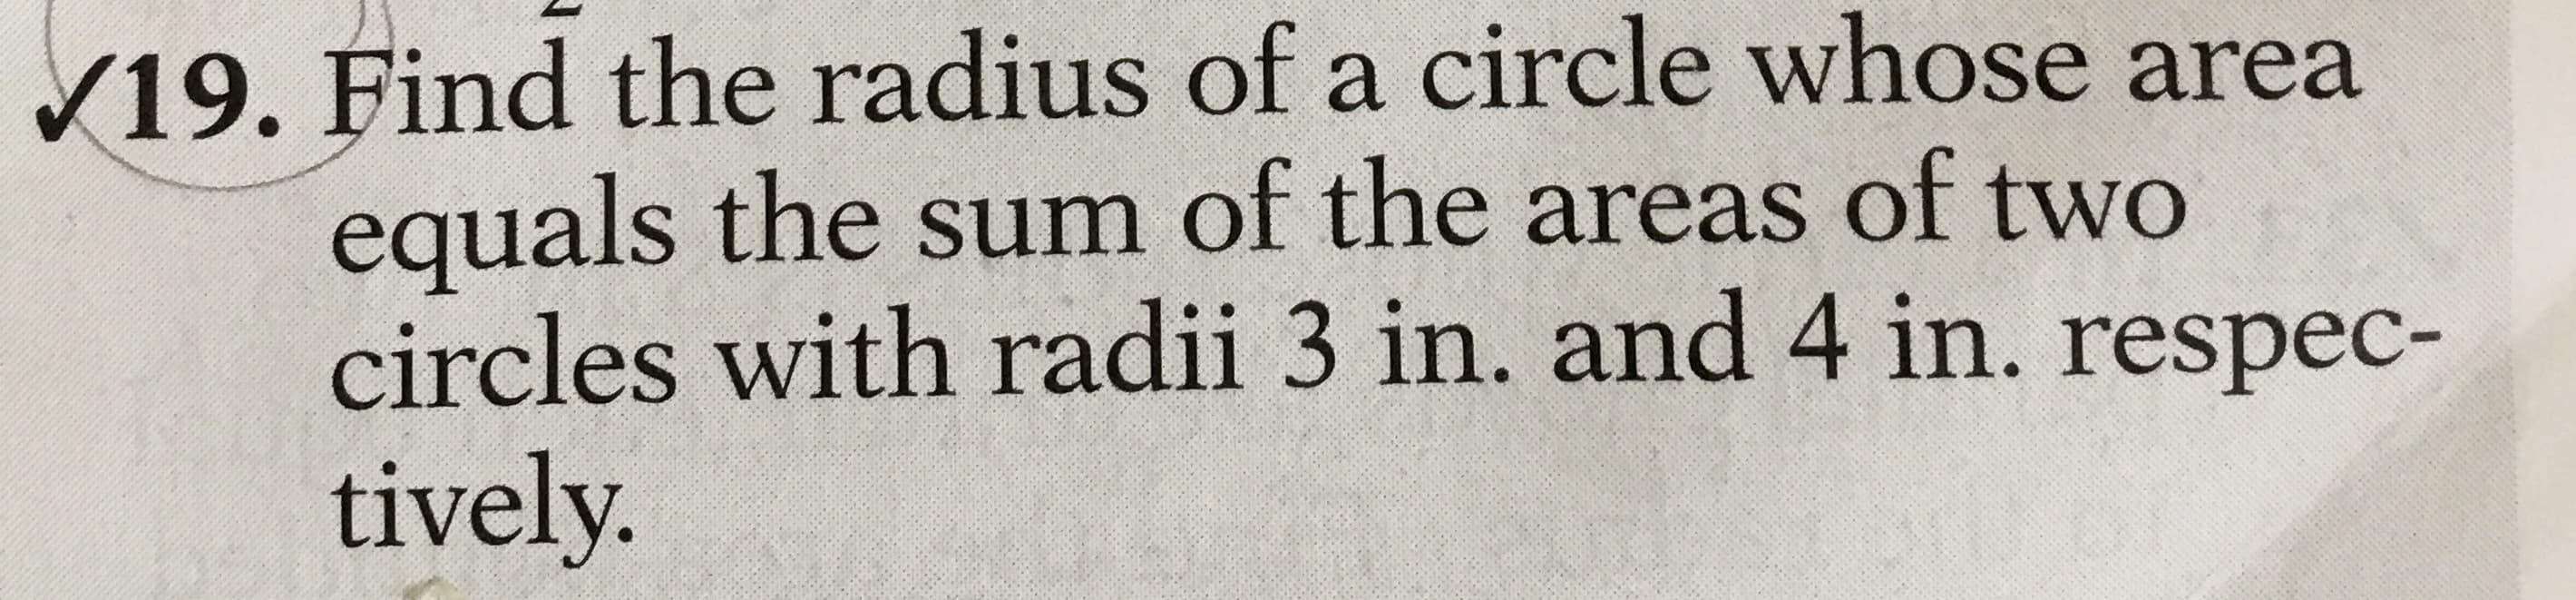 Find the radius of a circle whose area
equals the sum of the areas of two
circles with radii 3 in. and 4 in. respec-
tivelv.
